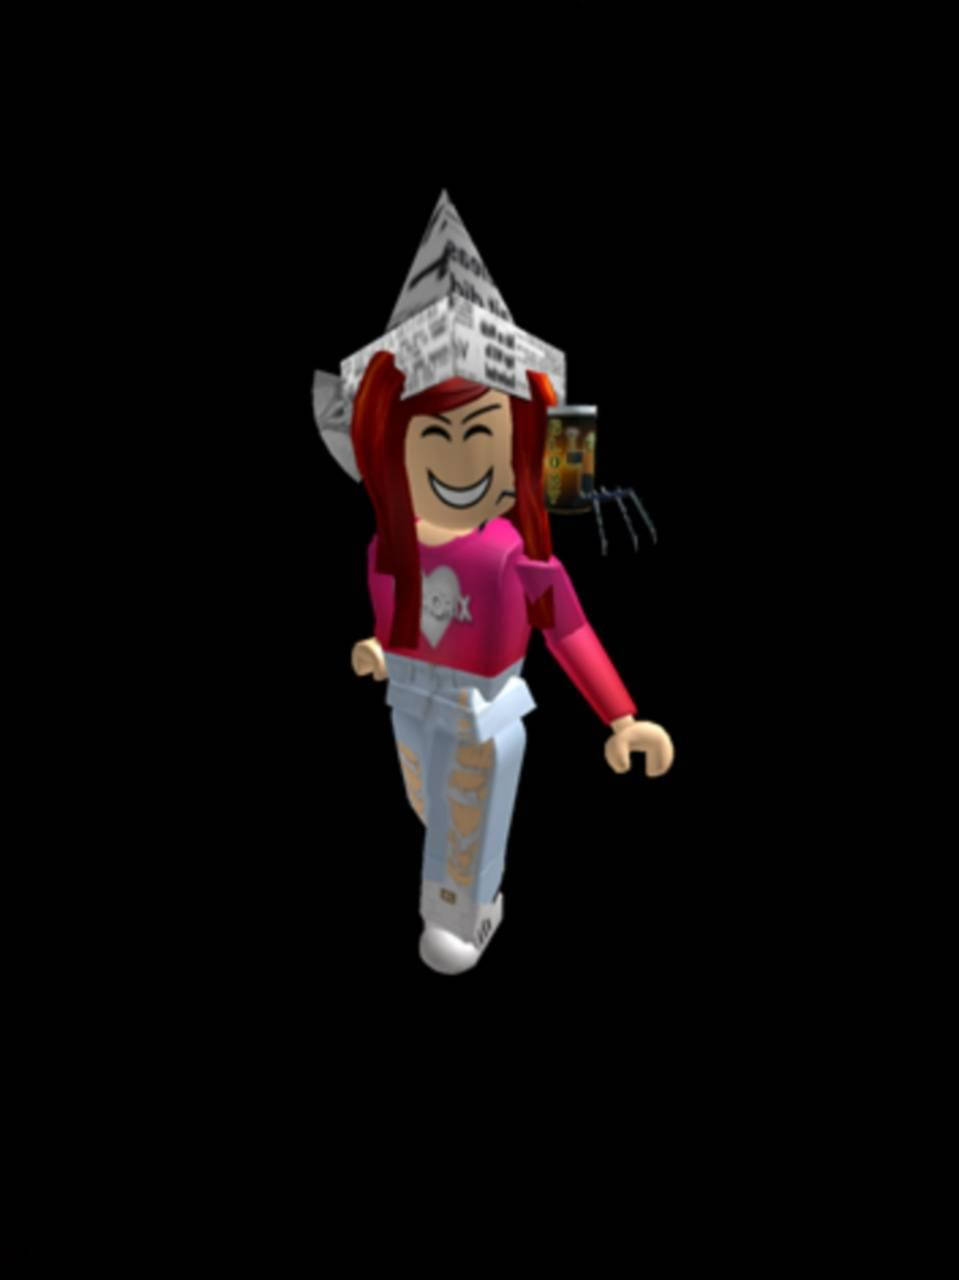 Cutest Roblox Outfit Ever! Wallpaper